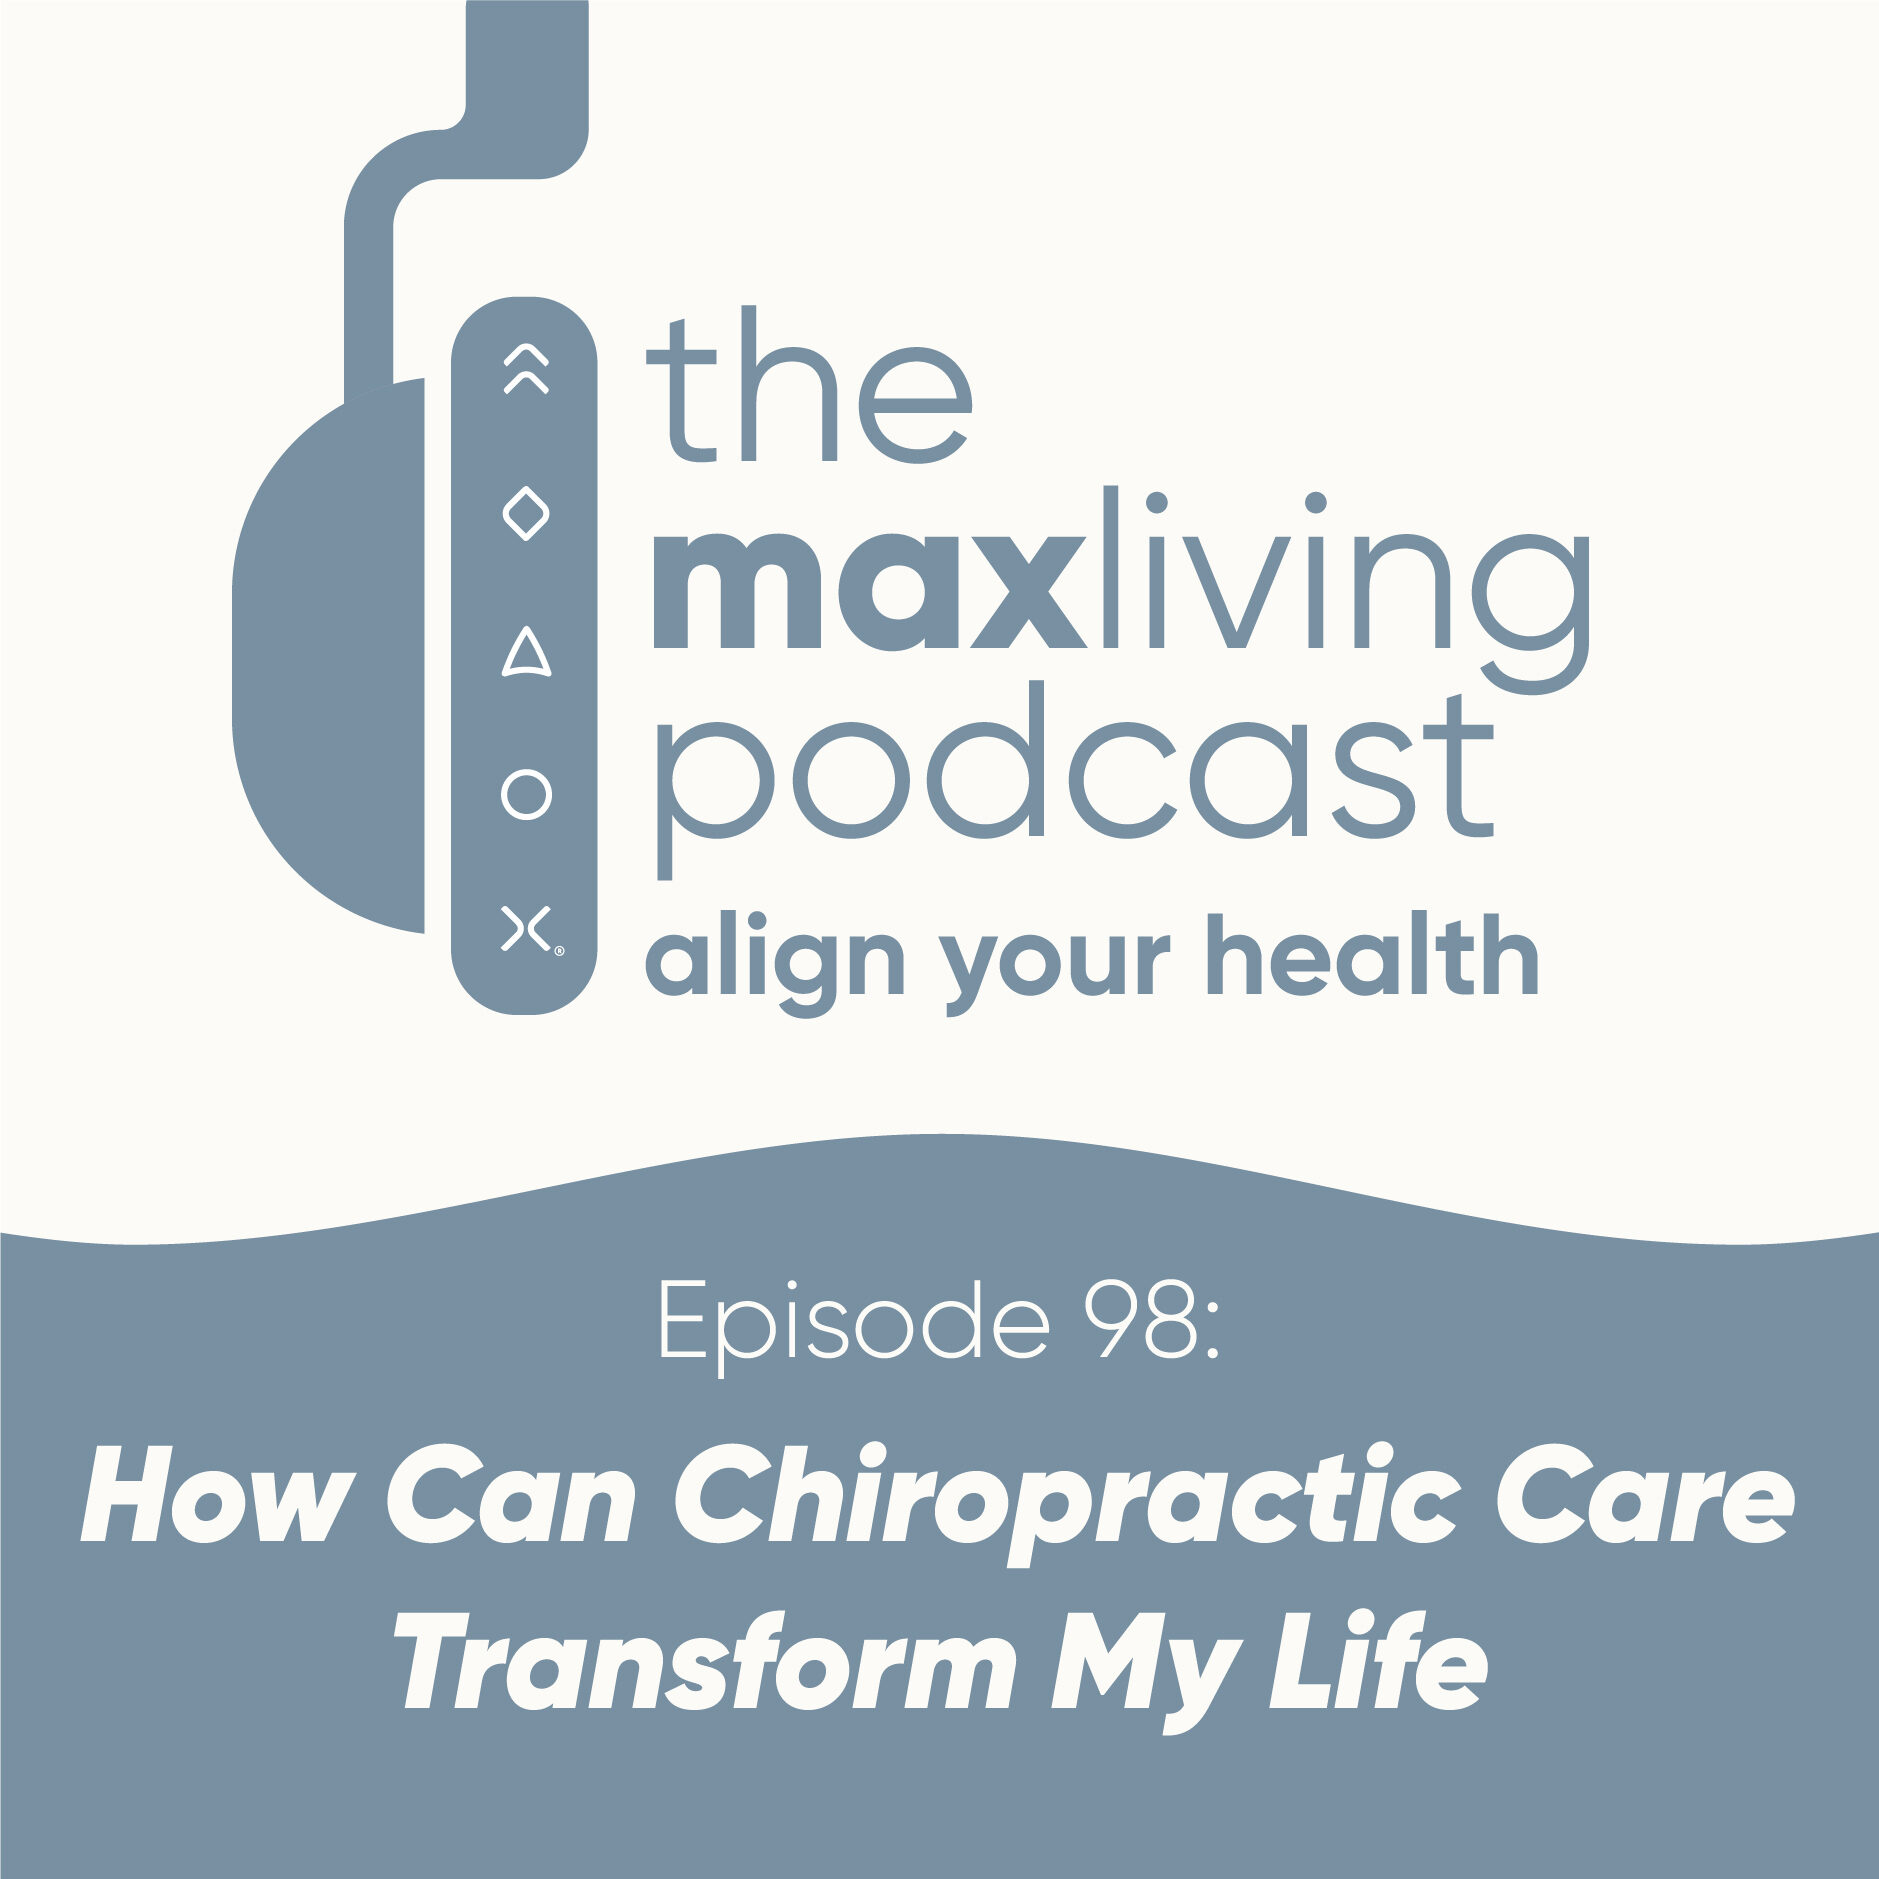 How Can Chiropractic Care Transform My Life?